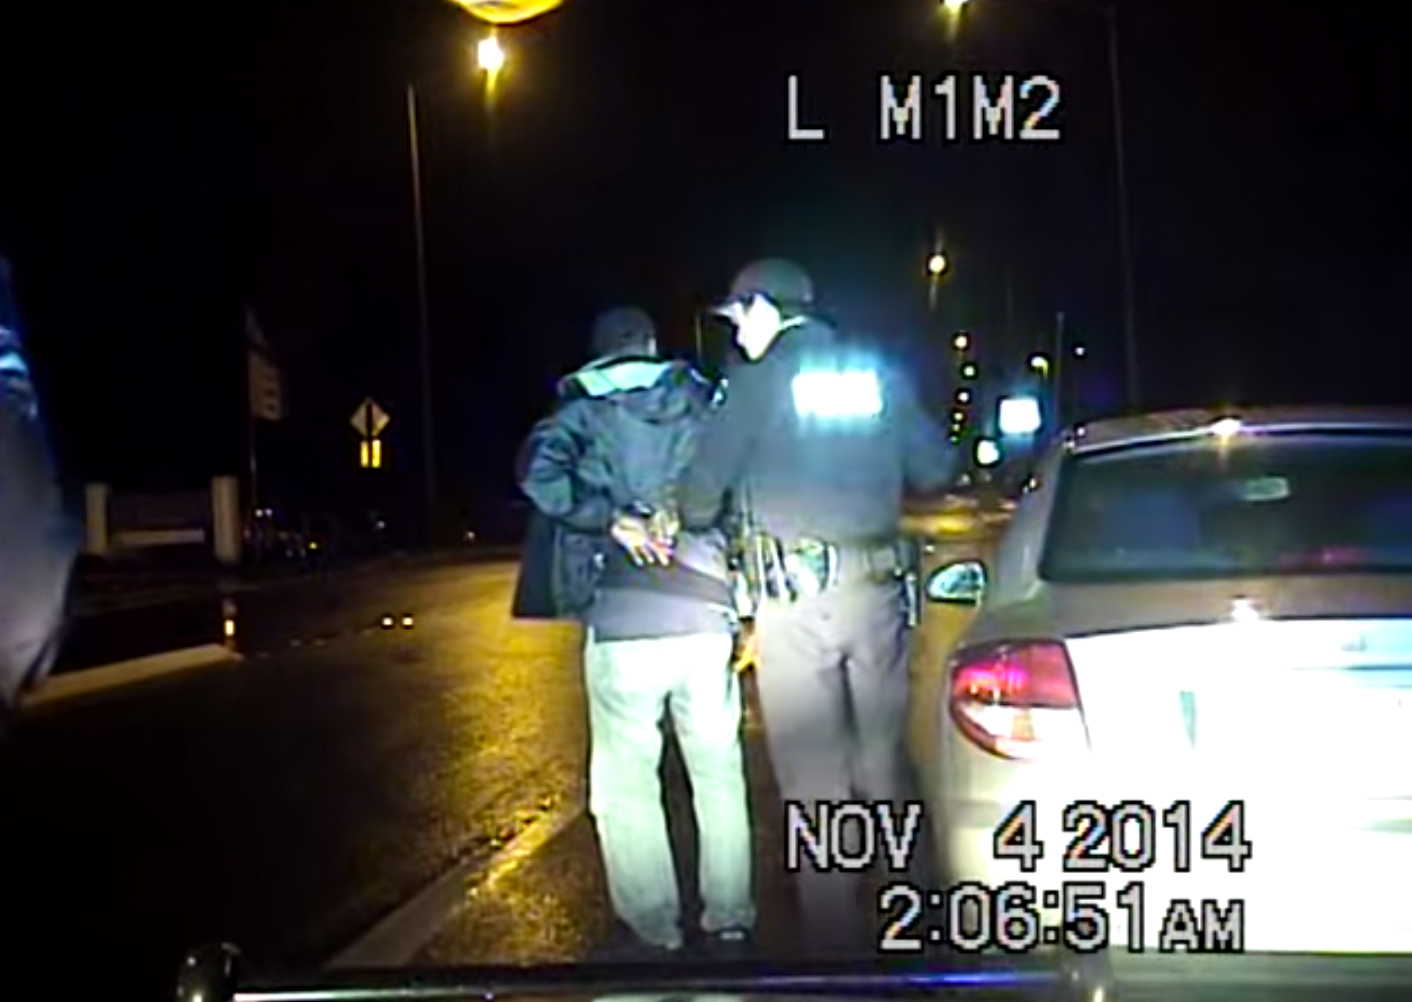 A dash-cam video posted by the anonymous Programmer shows an arrest in progress.